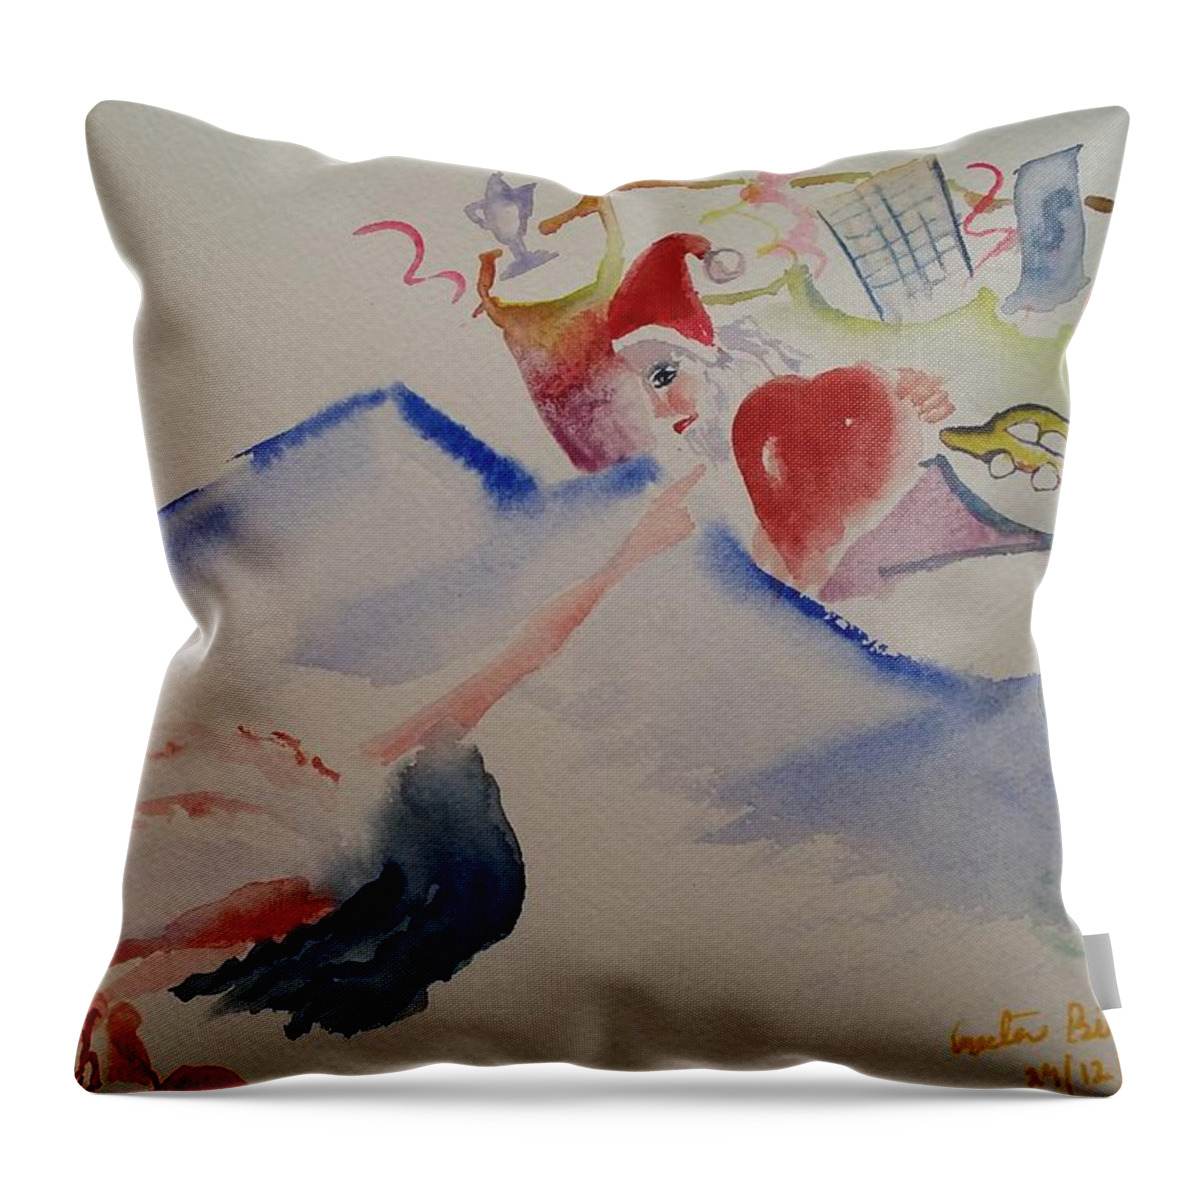 Angel Throw Pillow featuring the painting A gift for the angel by Geeta Yerra